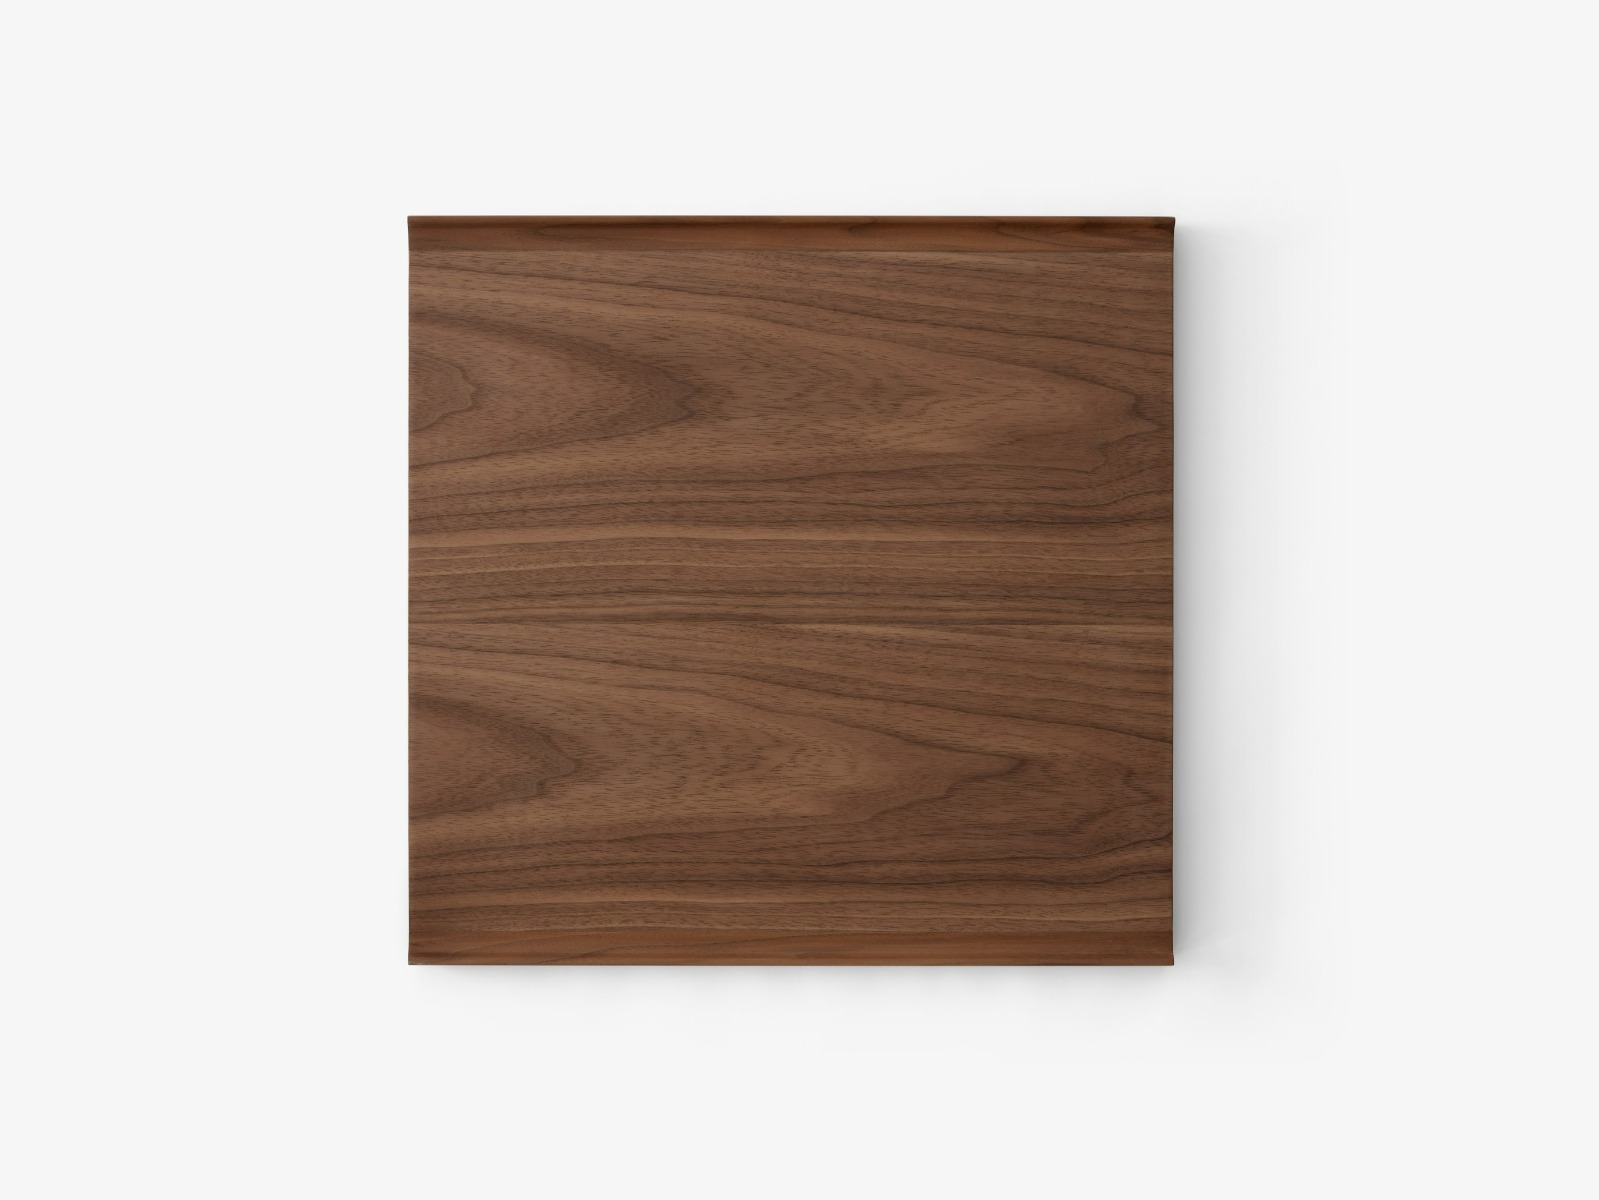 https://www.fundesign.nl/media/catalog/product/a/l/alima_nds1_walnut_tray_top.jpg